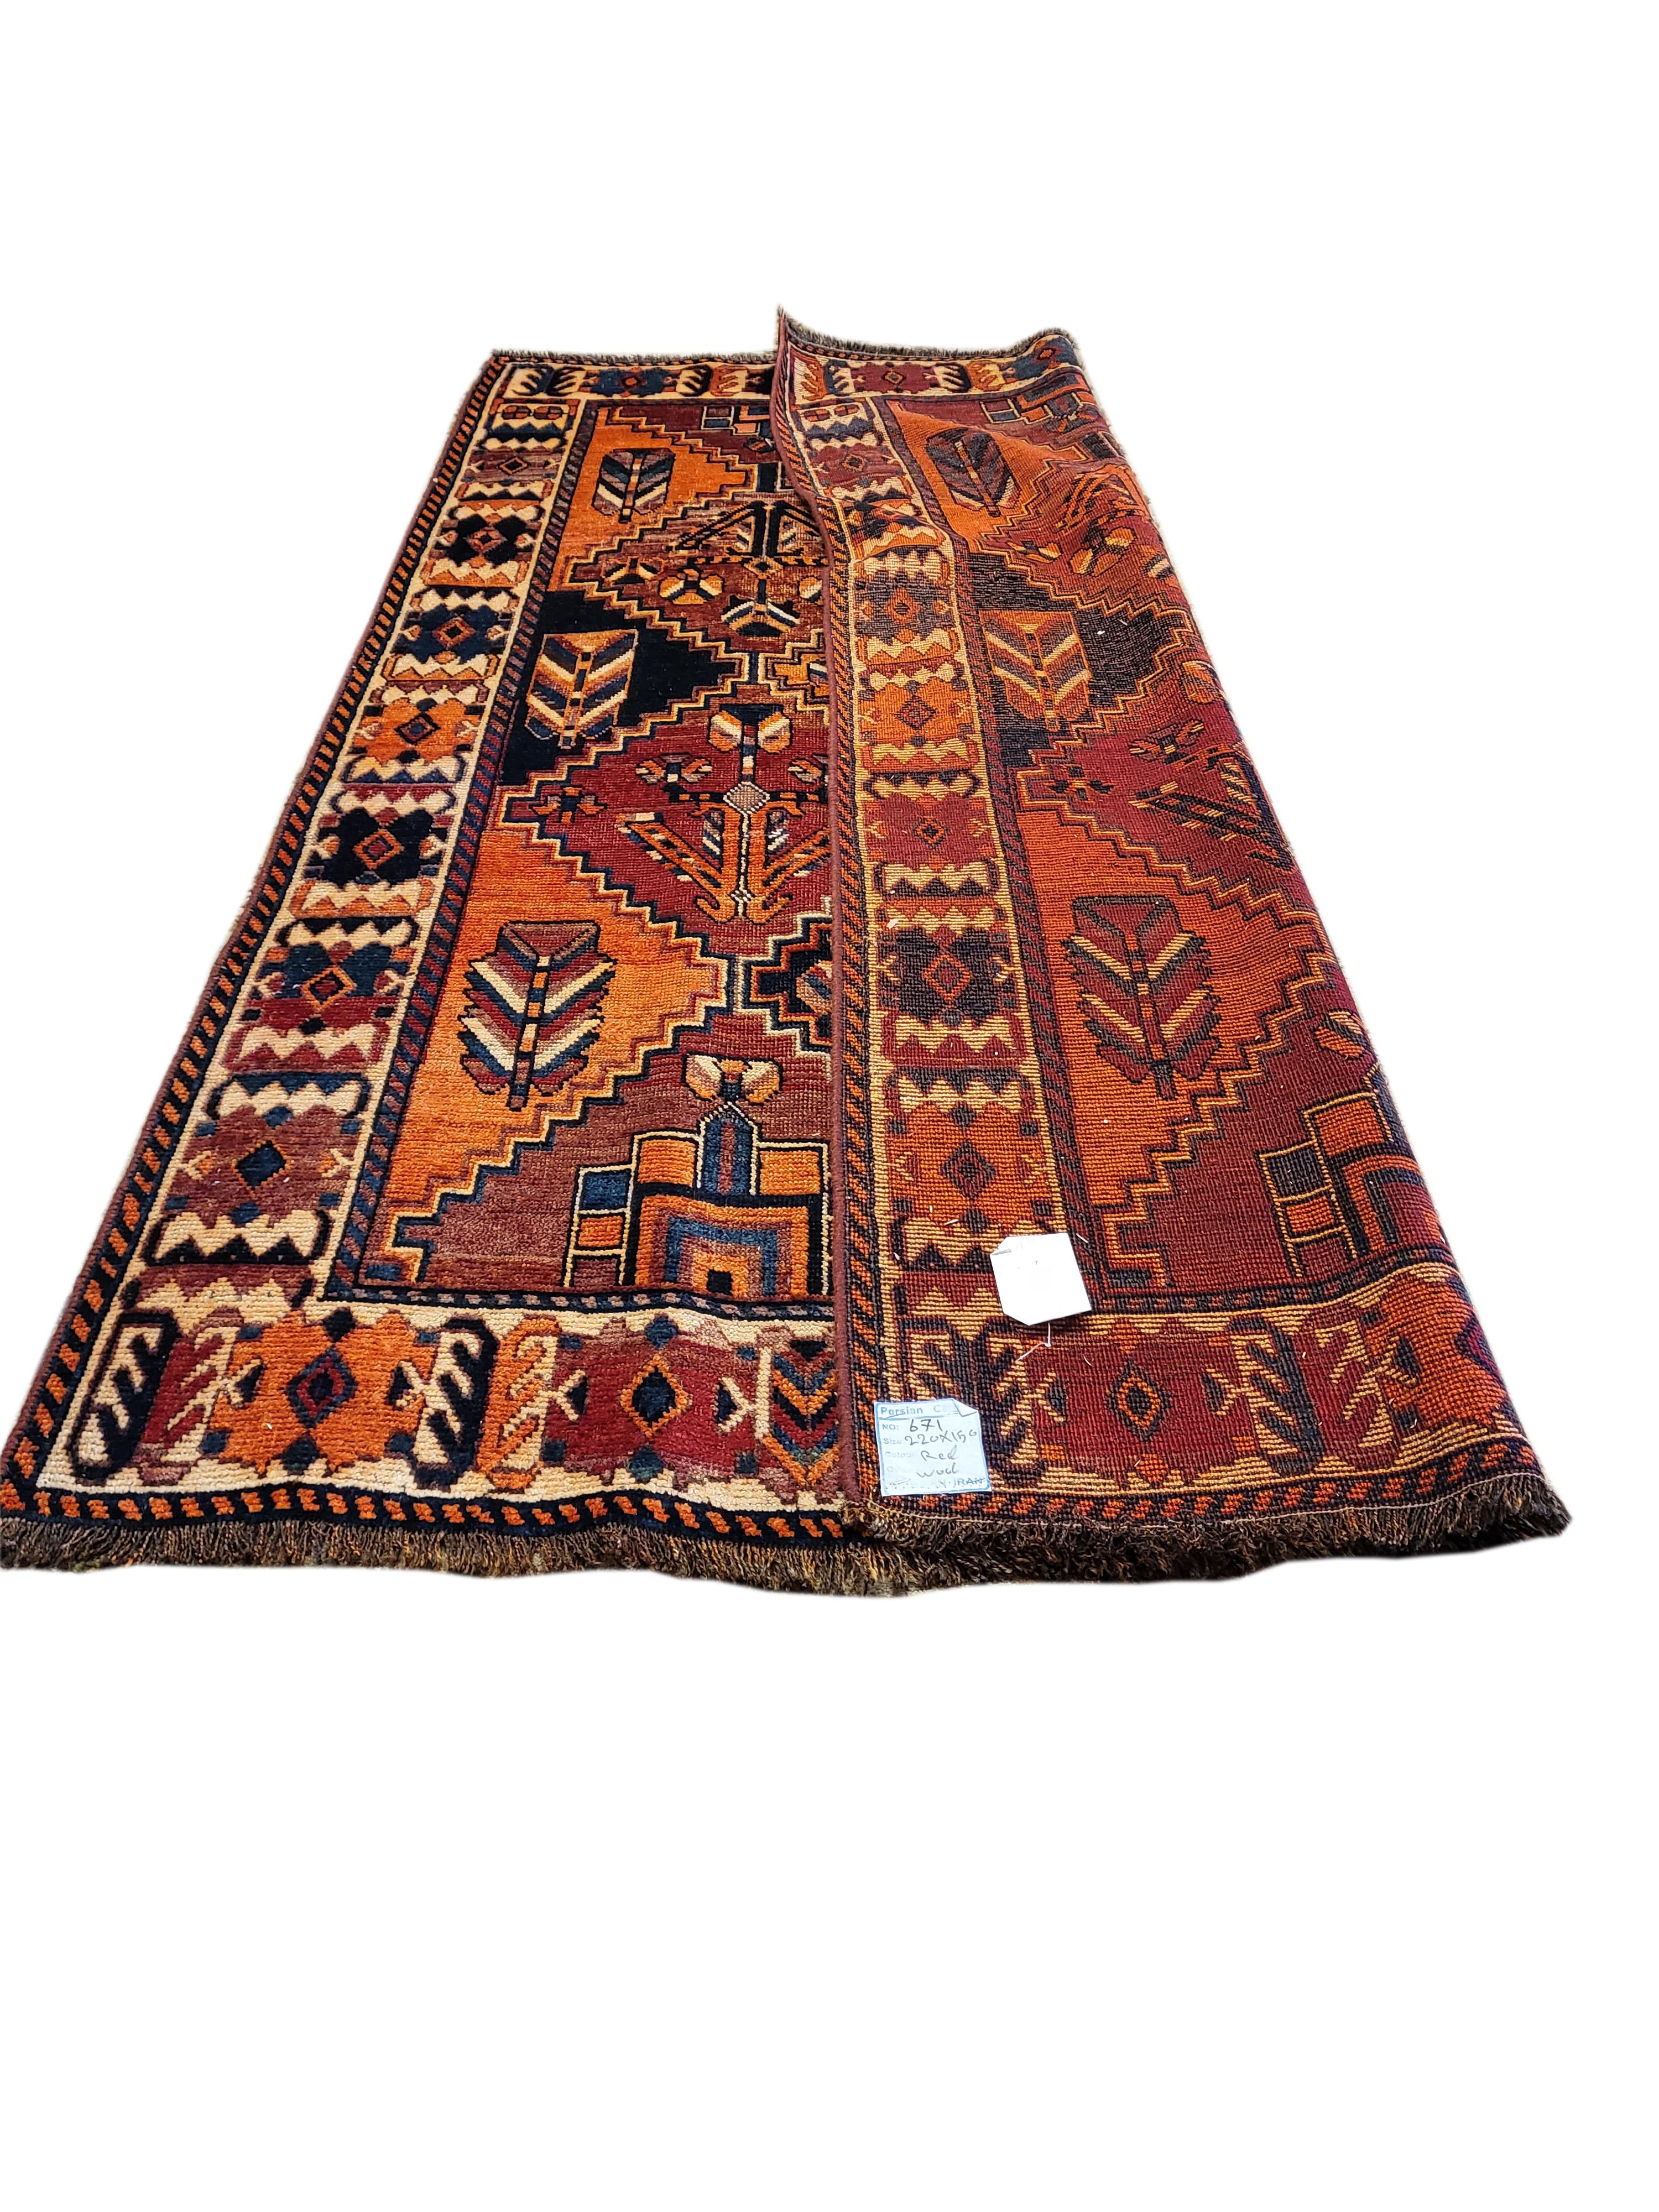 Breathtaking early 40's Persian Lori with a gorgeous colorway and rare all over design. In signature Lori fashion they've combined vibrant colors and sharp geometric designs. The Loris are a nomadic Persian tribe known for their geometric designs